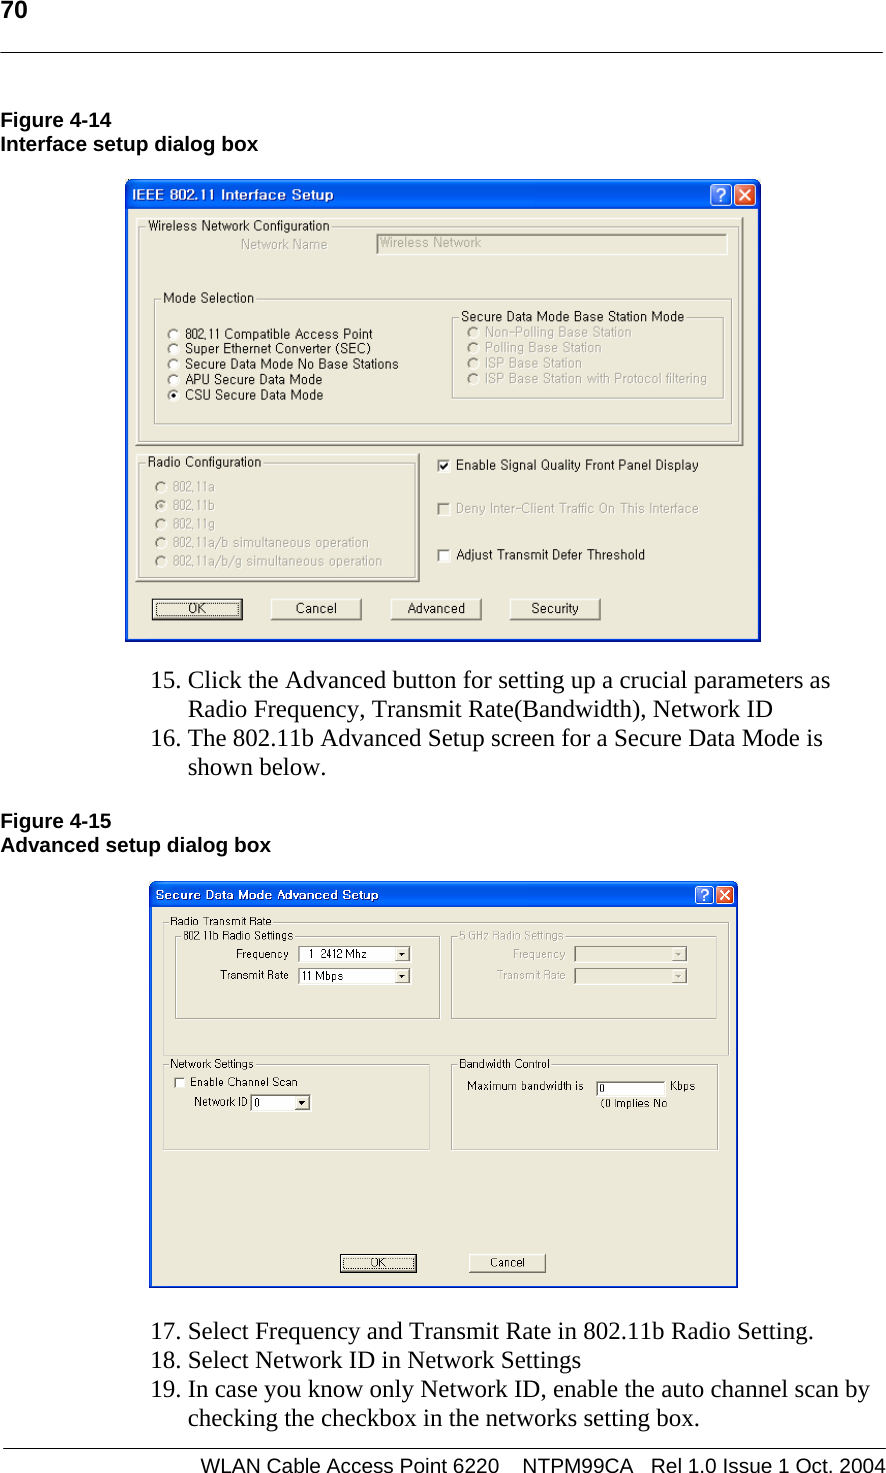   70   Figure 4-14 Interface setup dialog box     15. Click the Advanced button for setting up a crucial parameters as  Radio Frequency, Transmit Rate(Bandwidth), Network ID 16. The 802.11b Advanced Setup screen for a Secure Data Mode is shown below.  Figure 4-15 Advanced setup dialog box    17. Select Frequency and Transmit Rate in 802.11b Radio Setting. 18. Select Network ID in Network Settings 19. In case you know only Network ID, enable the auto channel scan by checking the checkbox in the networks setting box. WLAN Cable Access Point 6220    NTPM99CA   Rel 1.0 Issue 1 Oct. 2004